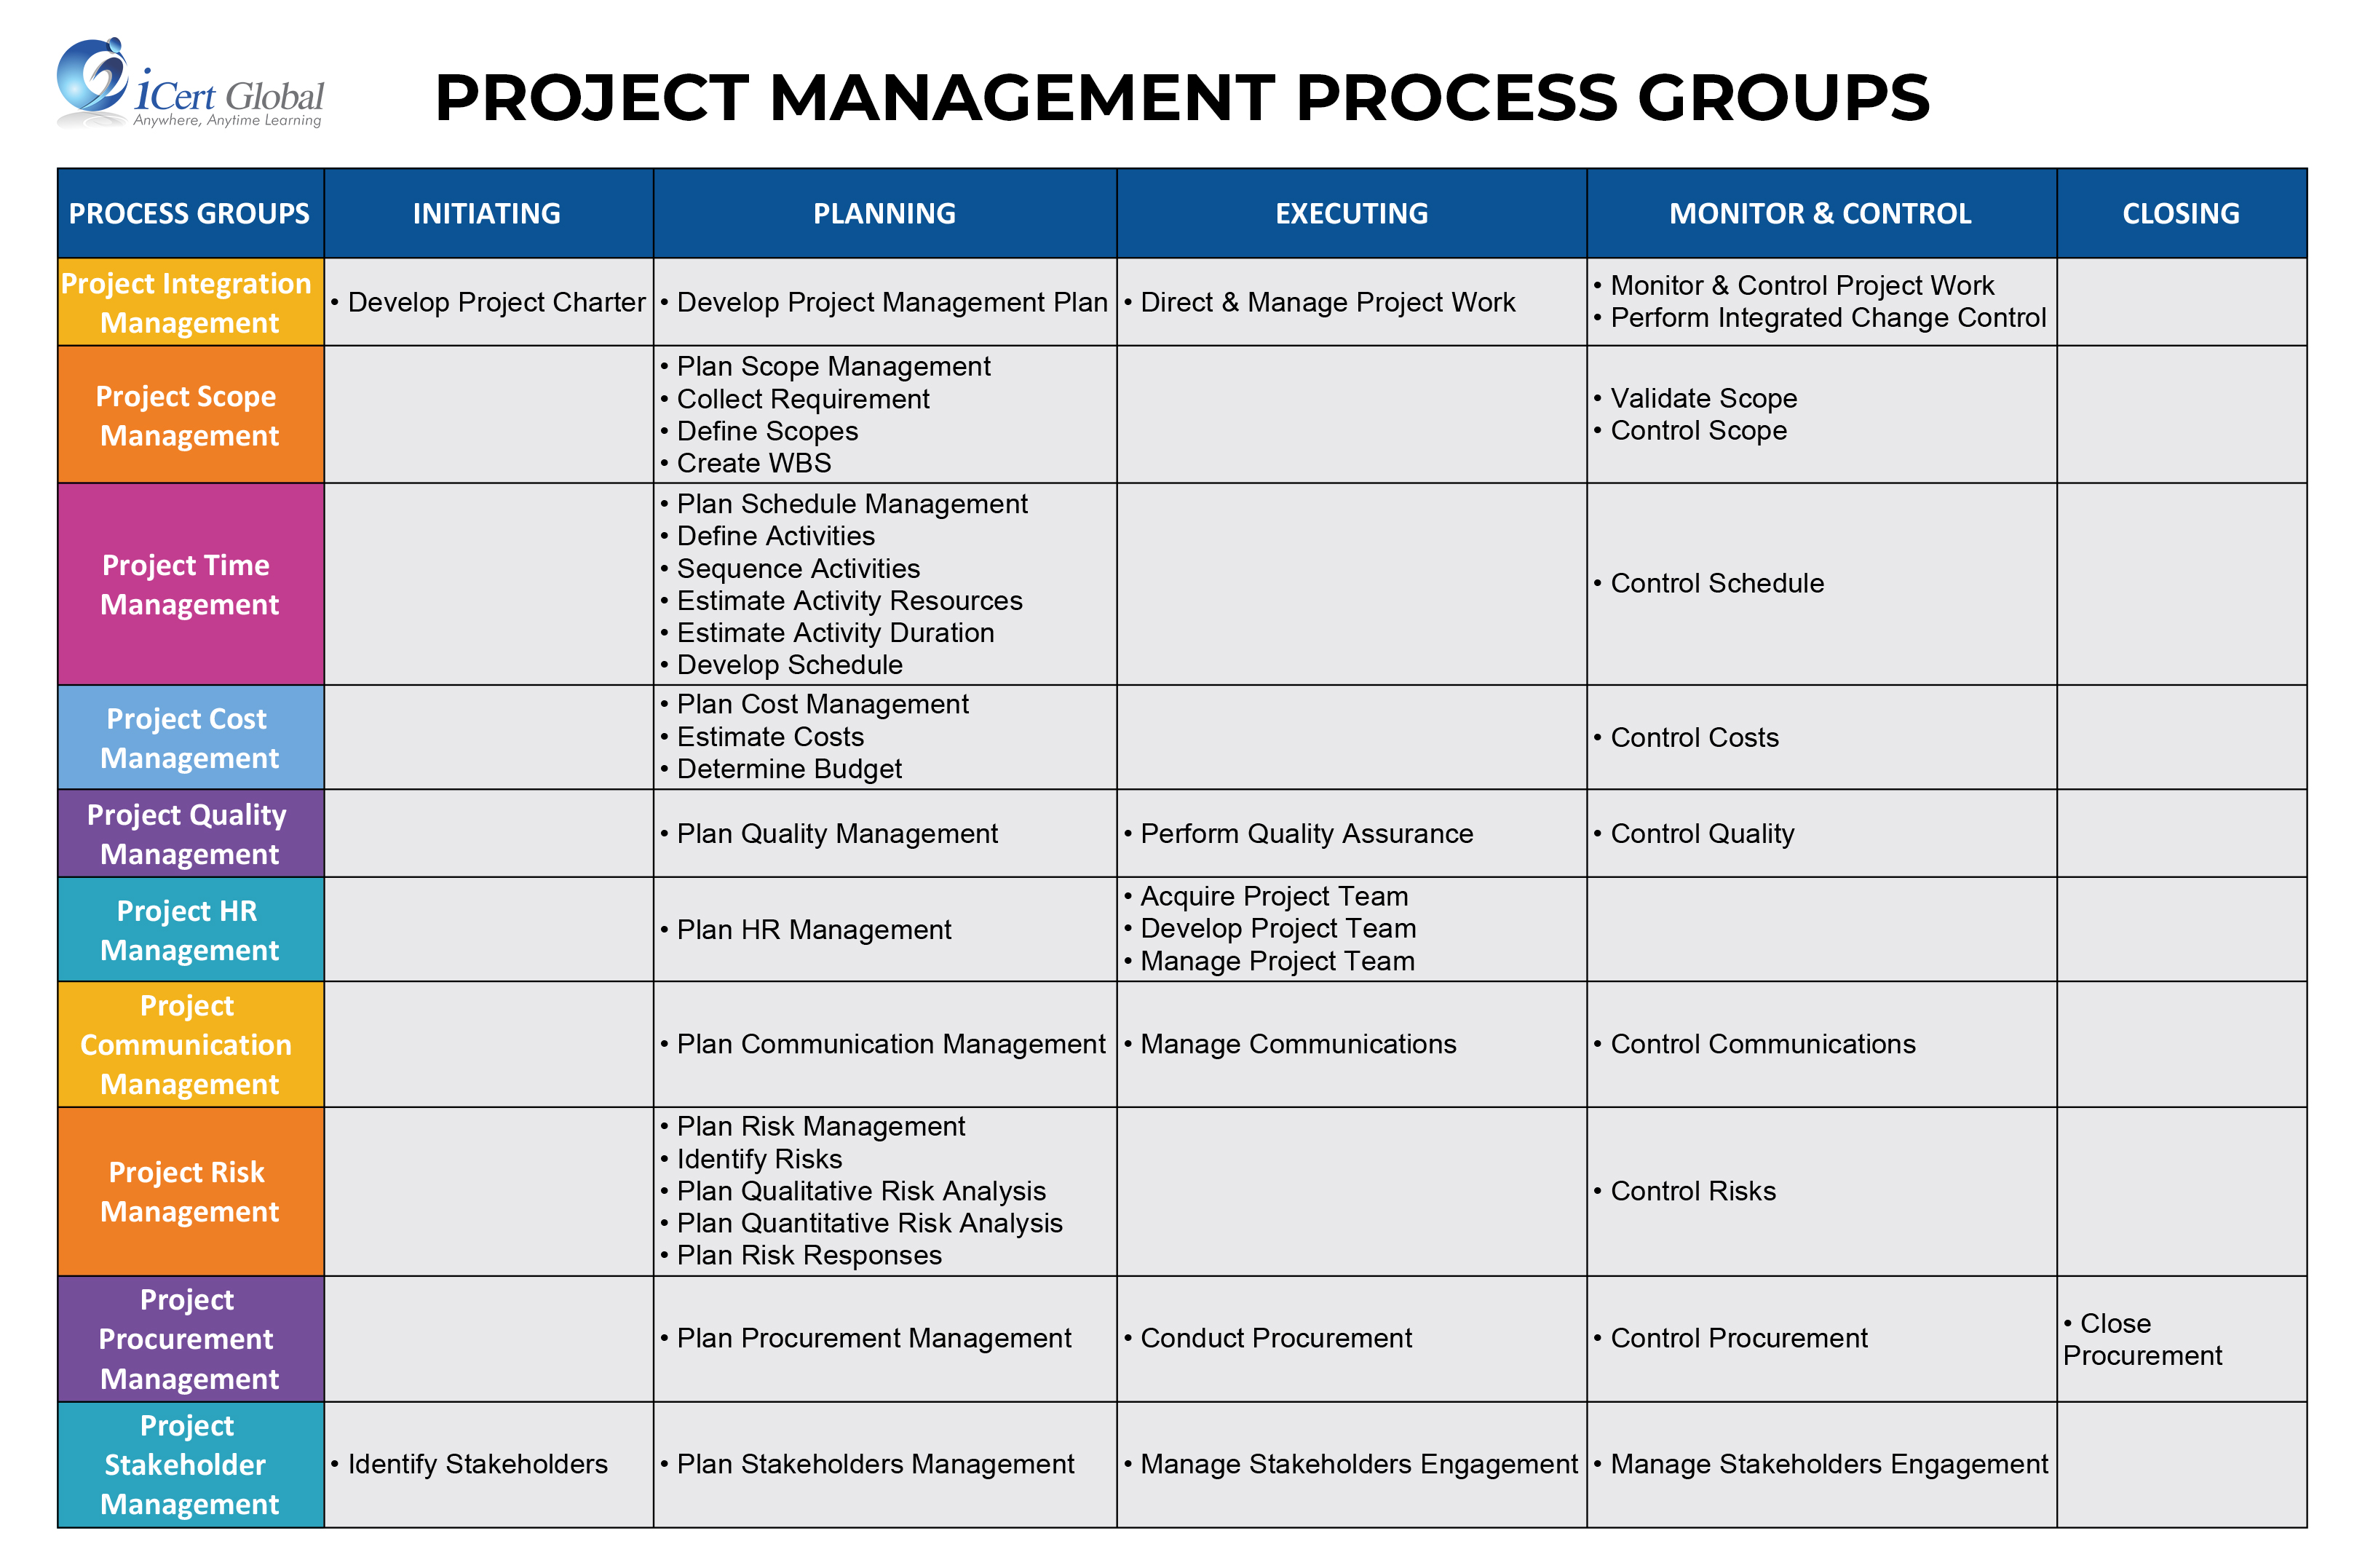 project management process groups and knowledge areas mapping